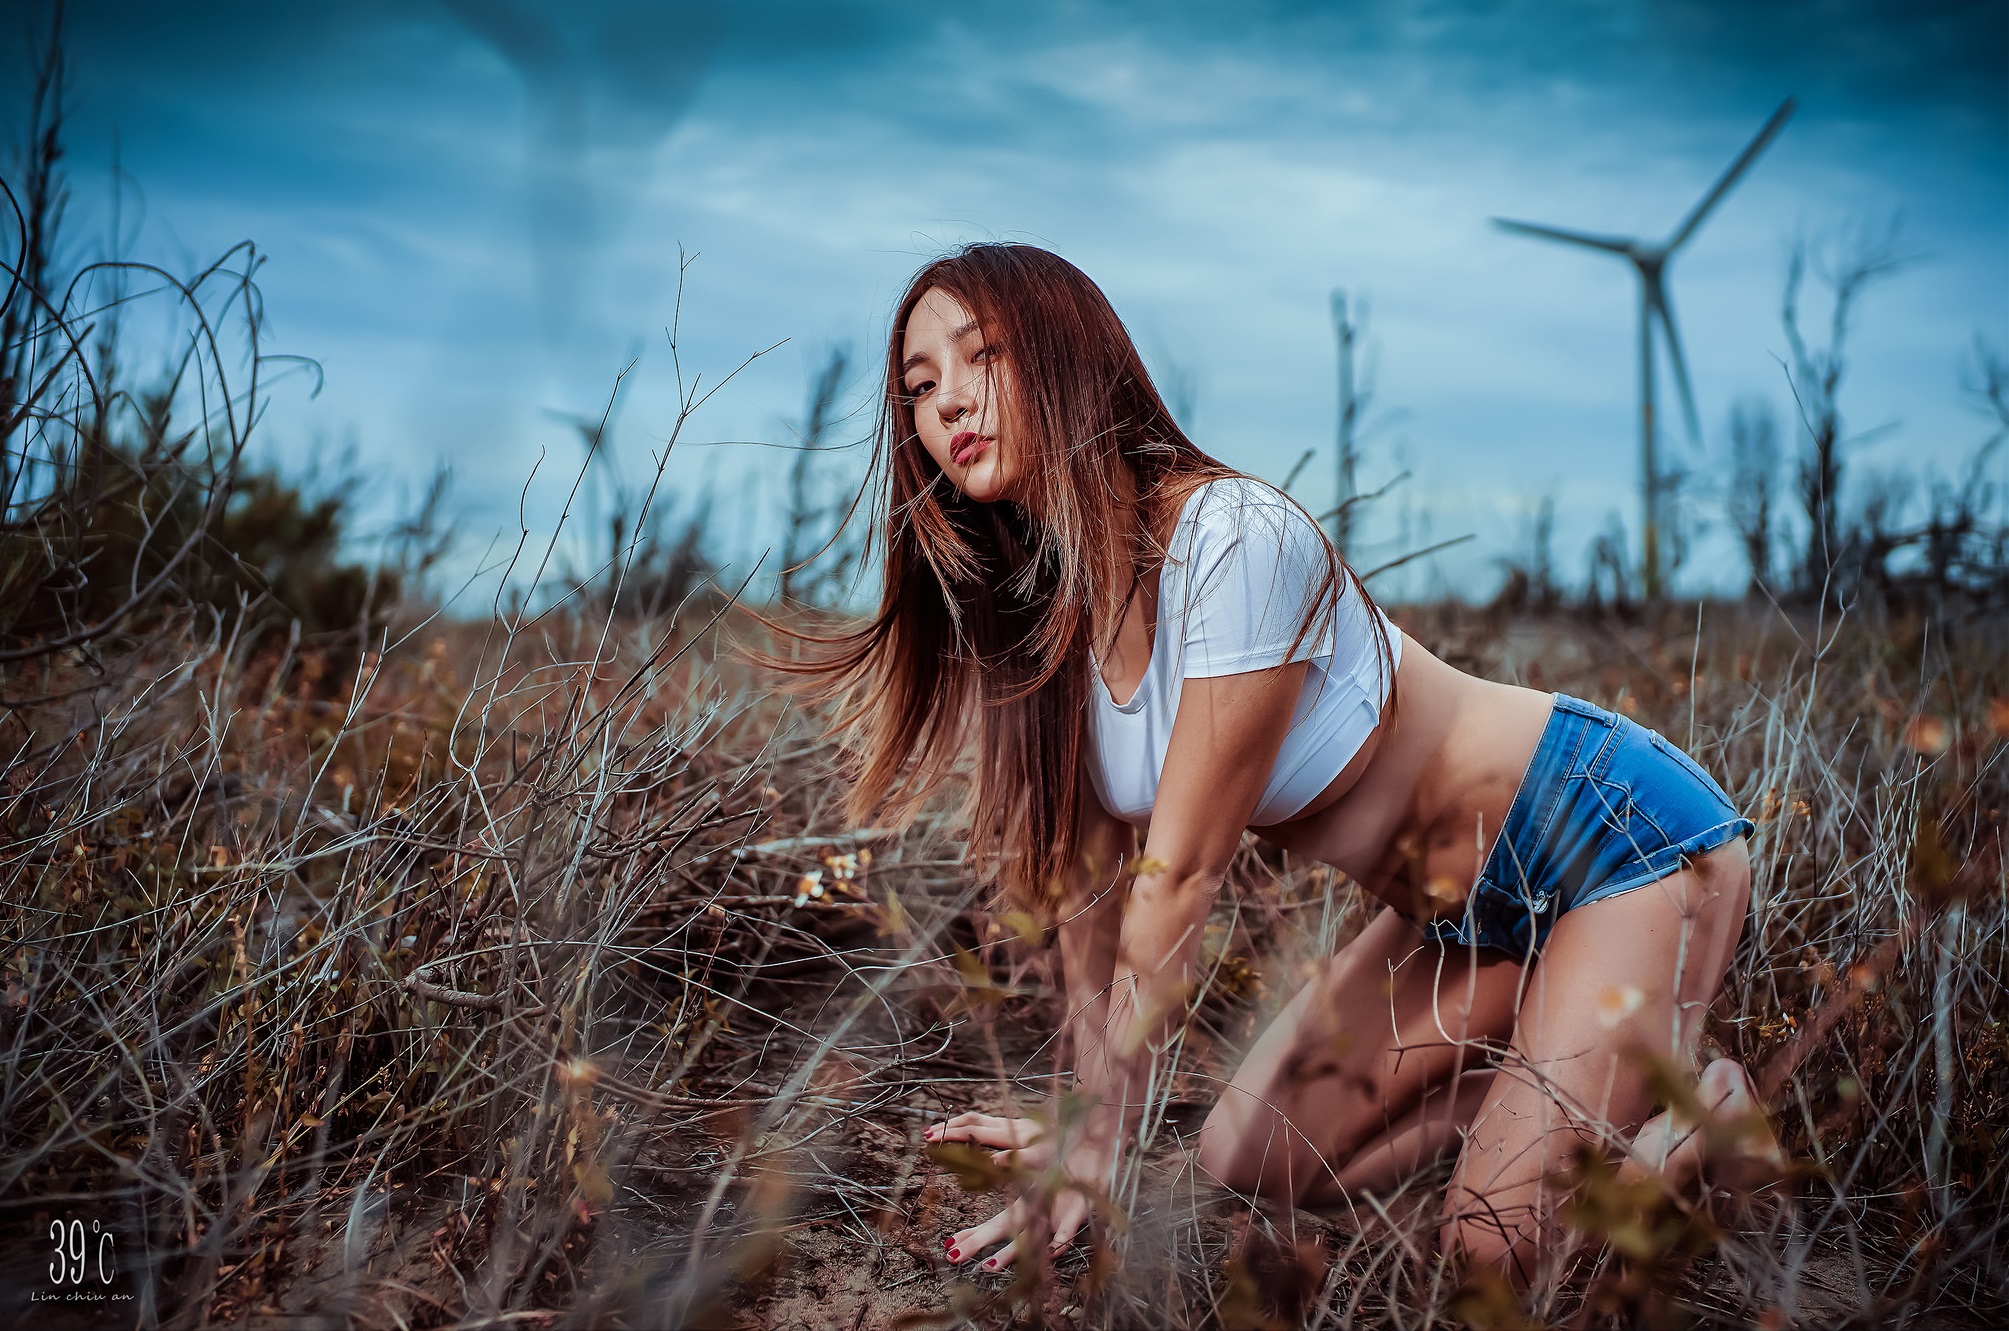 People 2009x1331 Jenny Suen Asian women model women outdoors white tops crop top jean shorts kneeling red nails looking at viewer hair in face red lipstick T-shirt watermarked